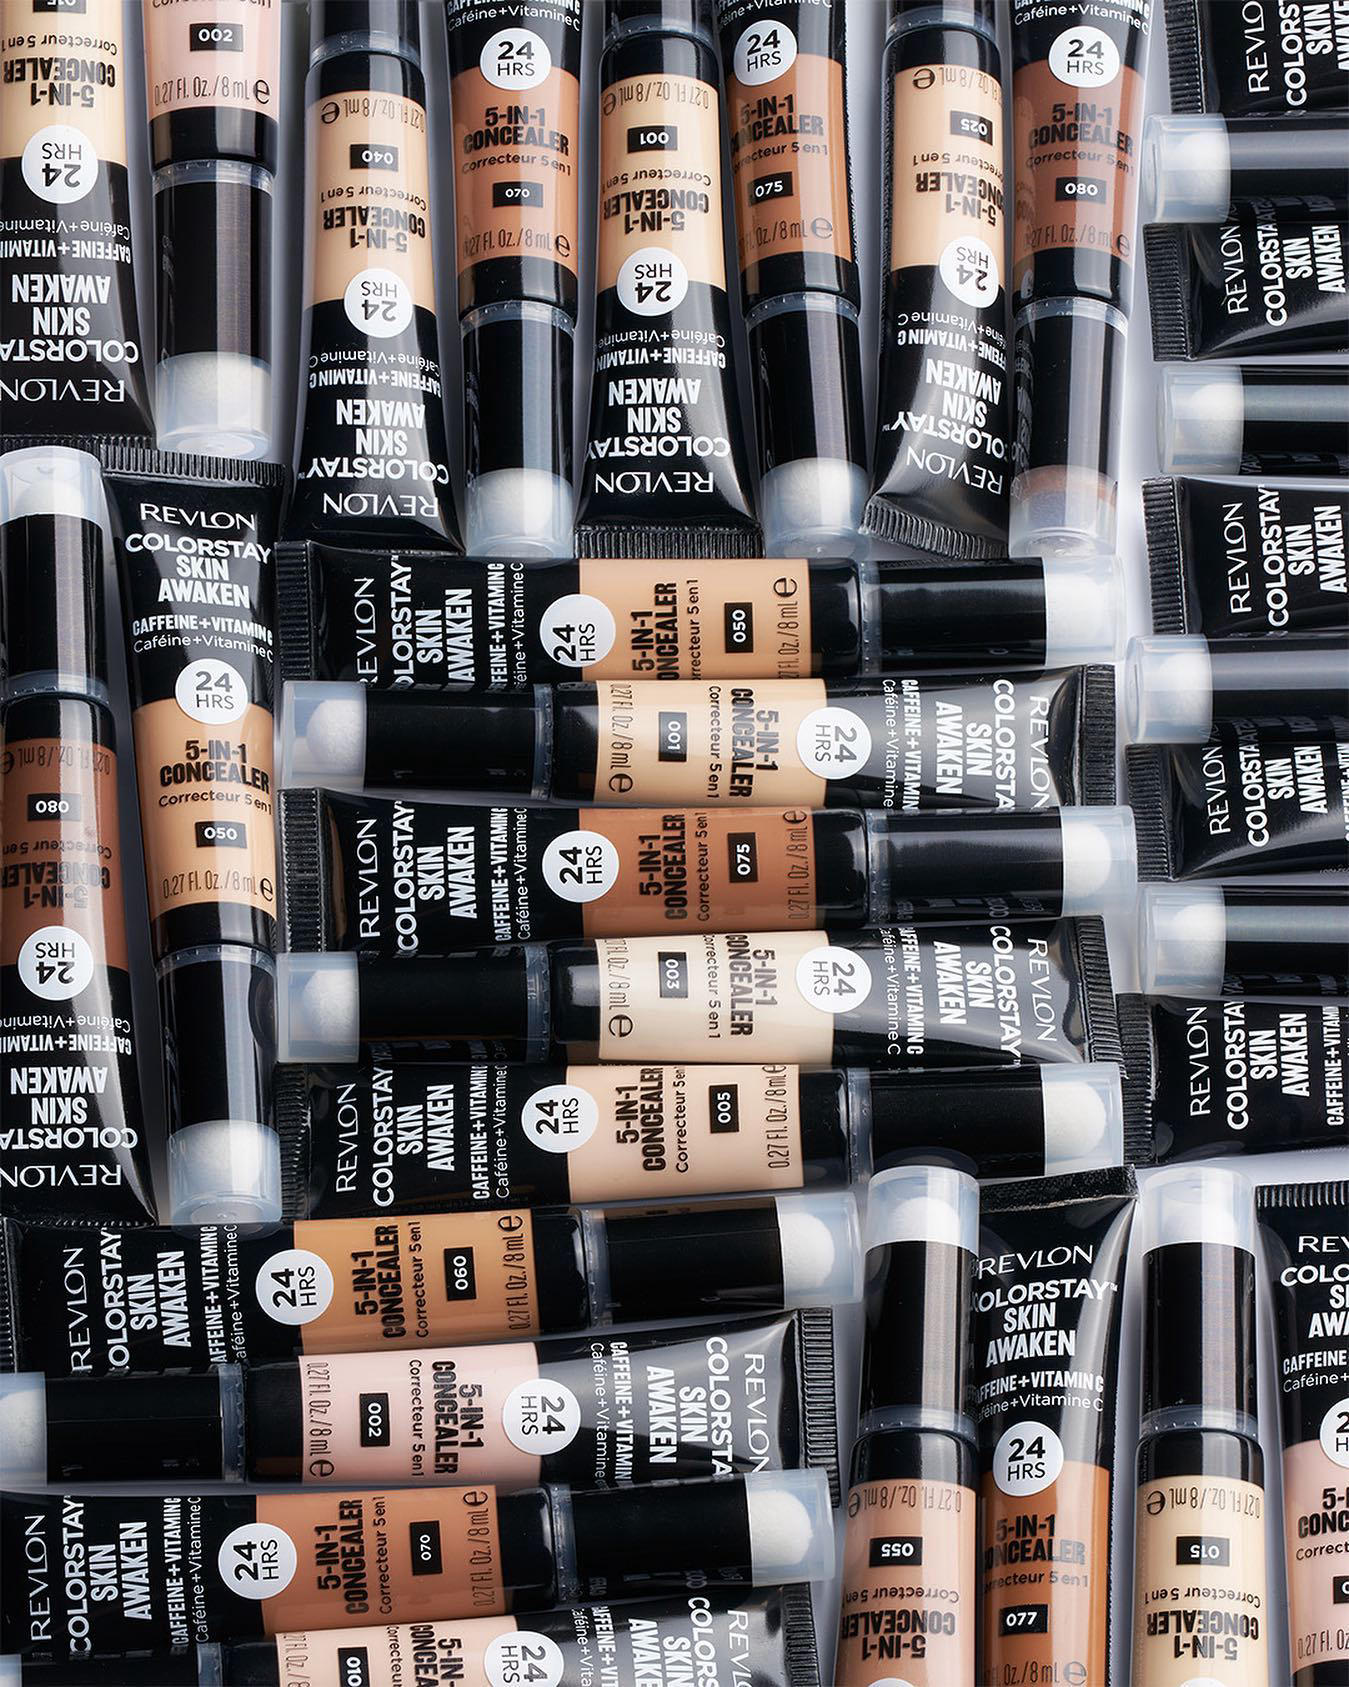 Revlon - Our #ColorStay Skin Awaken Concealer is basically 5 presents in one